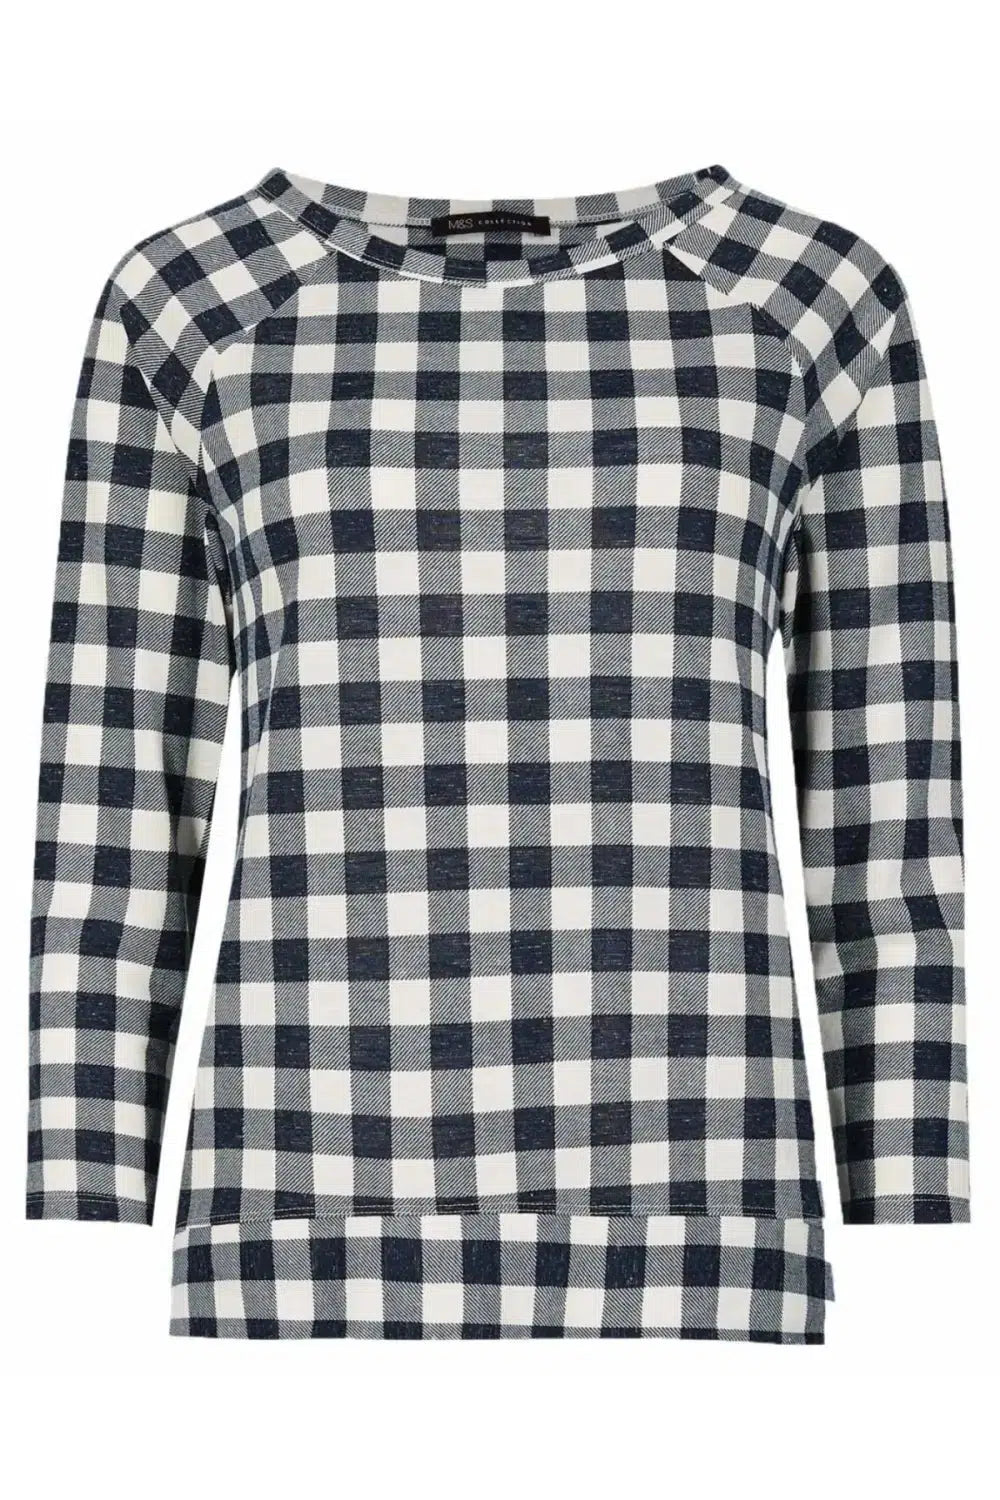 M&S Check Gingham Top